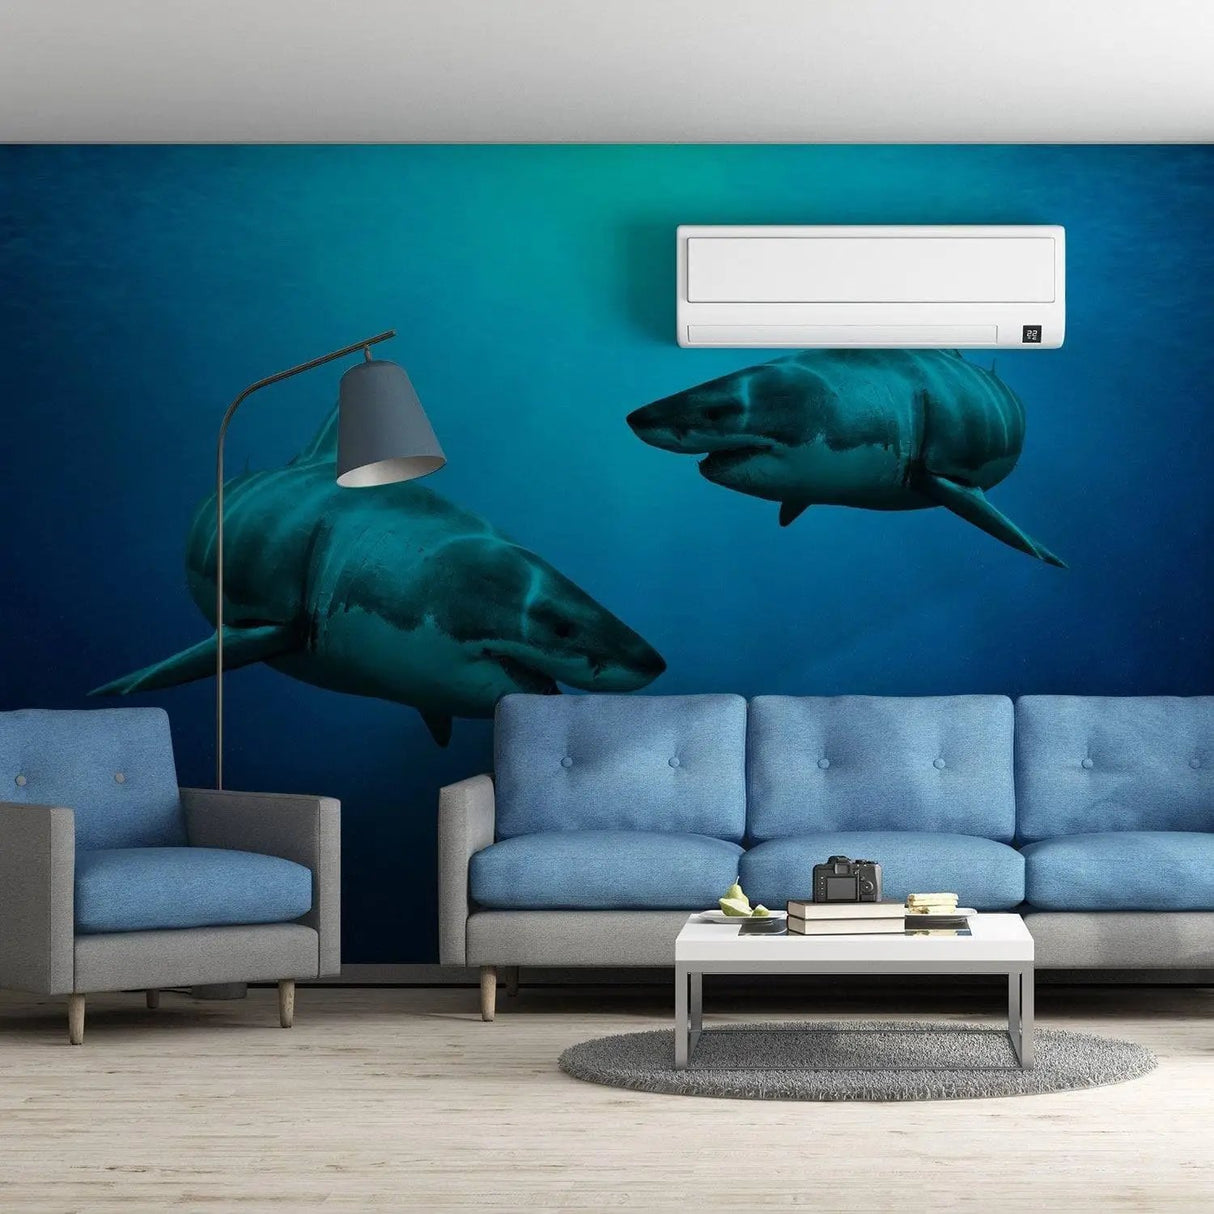 Wallpaper Shark Decor Sticker - 3d Underwater Ocean Wall Stickers Removable Decal - Under Sea Home Bedroom Adhesive Decorations Art Mural - Decords